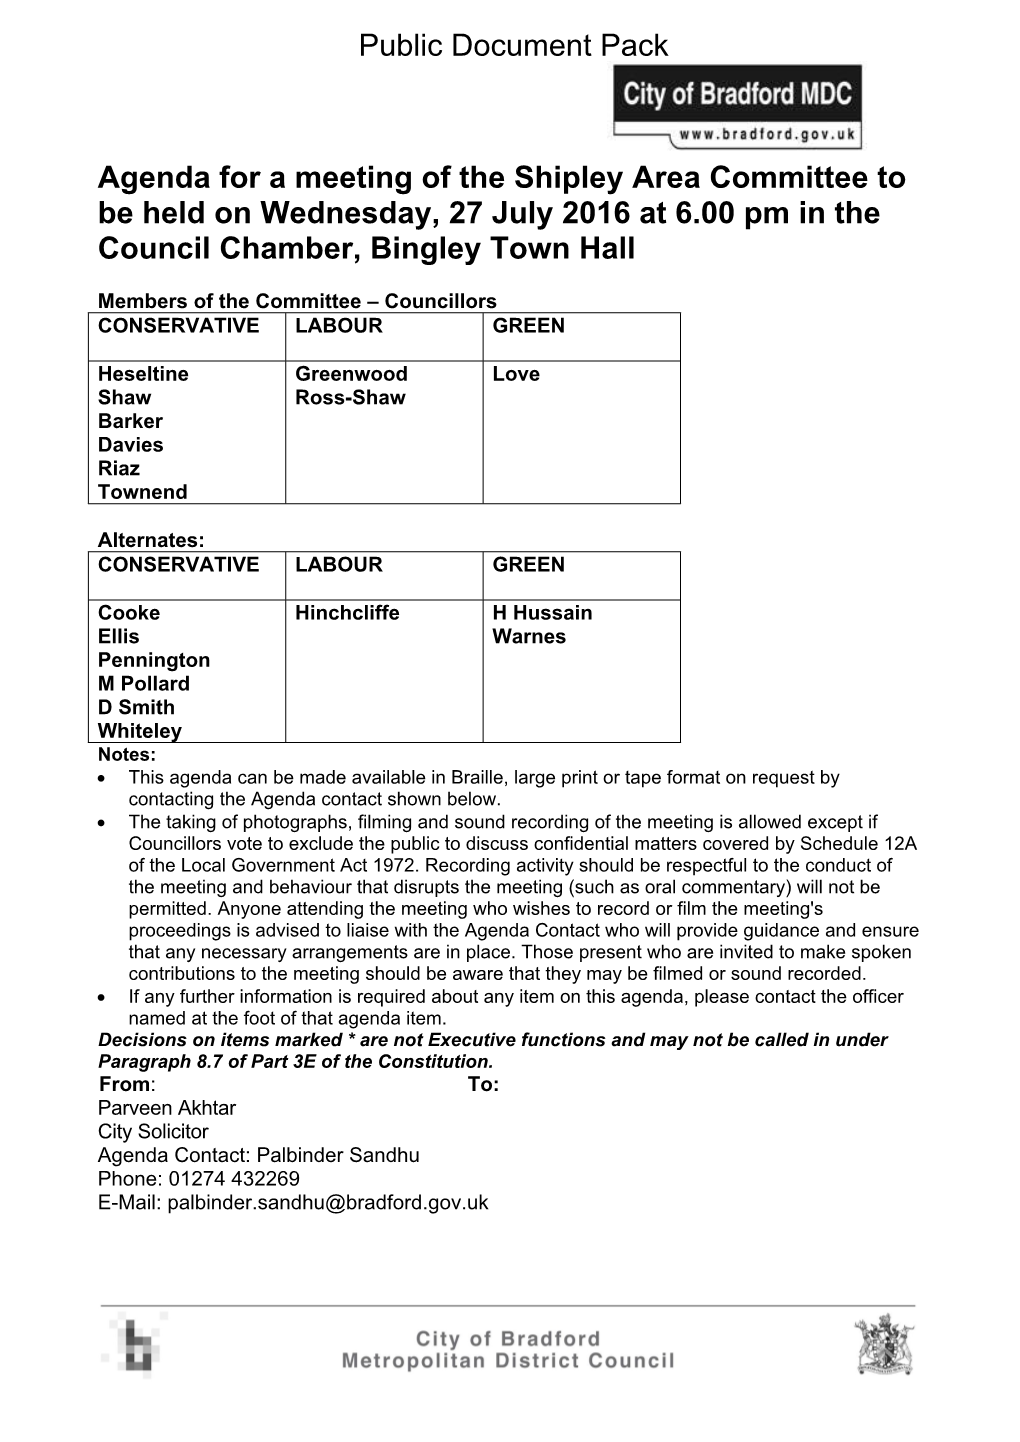 (Public Pack)Agenda Document for Shipley Area Committee, 27/07